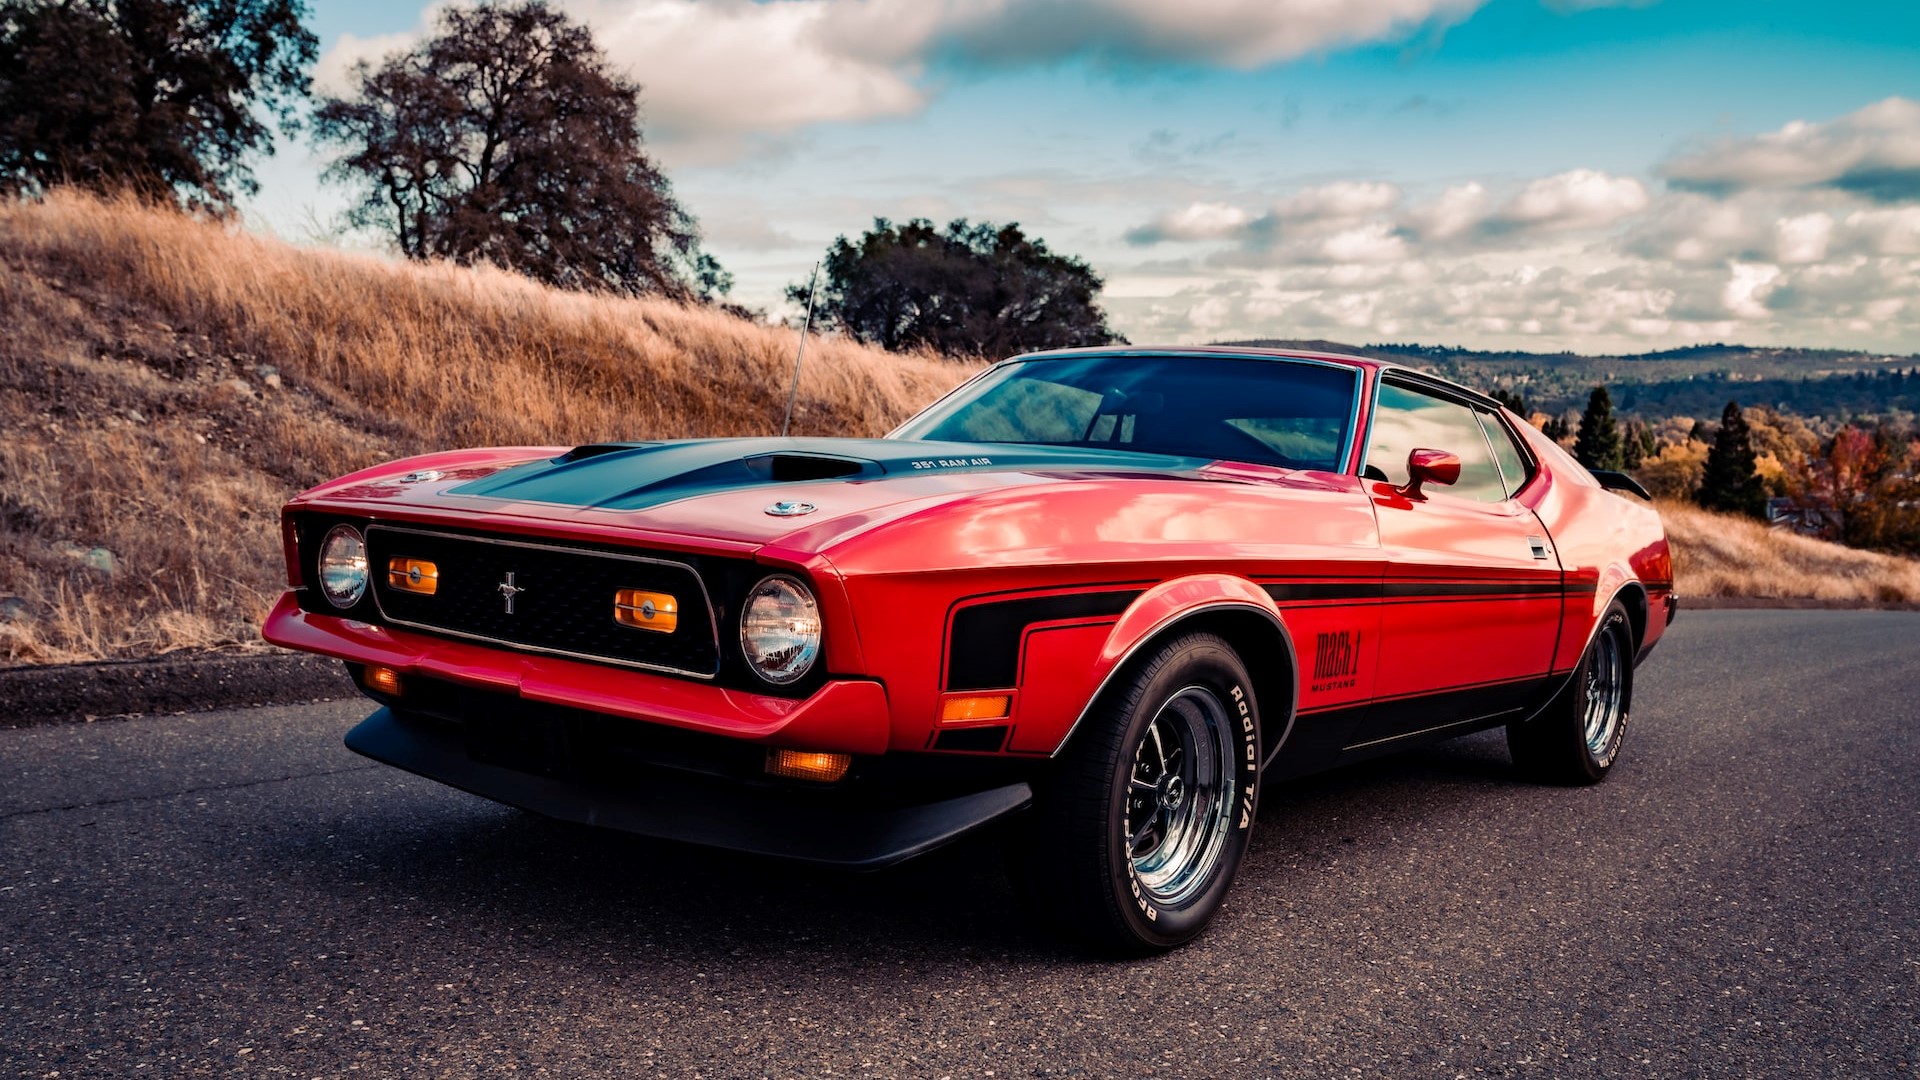 1972 Ford Mustang | Goodwill Car Donations